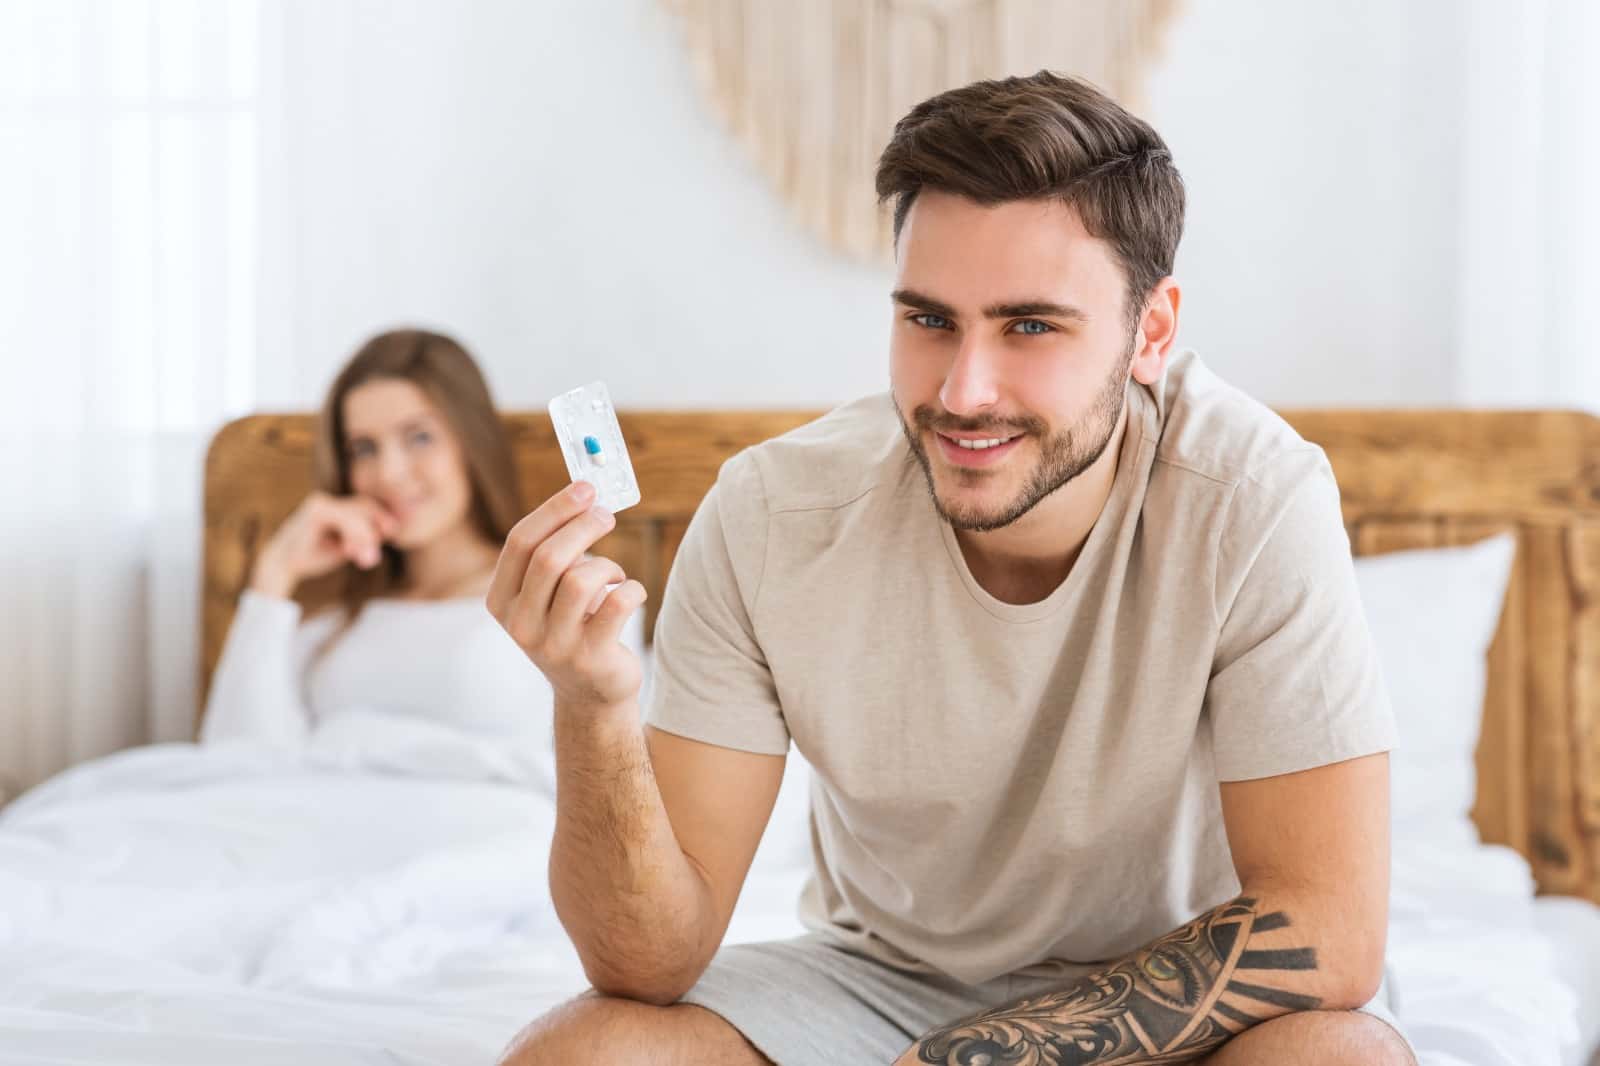 Cultivating intimacy in relationships impacted by erectile dysfunction